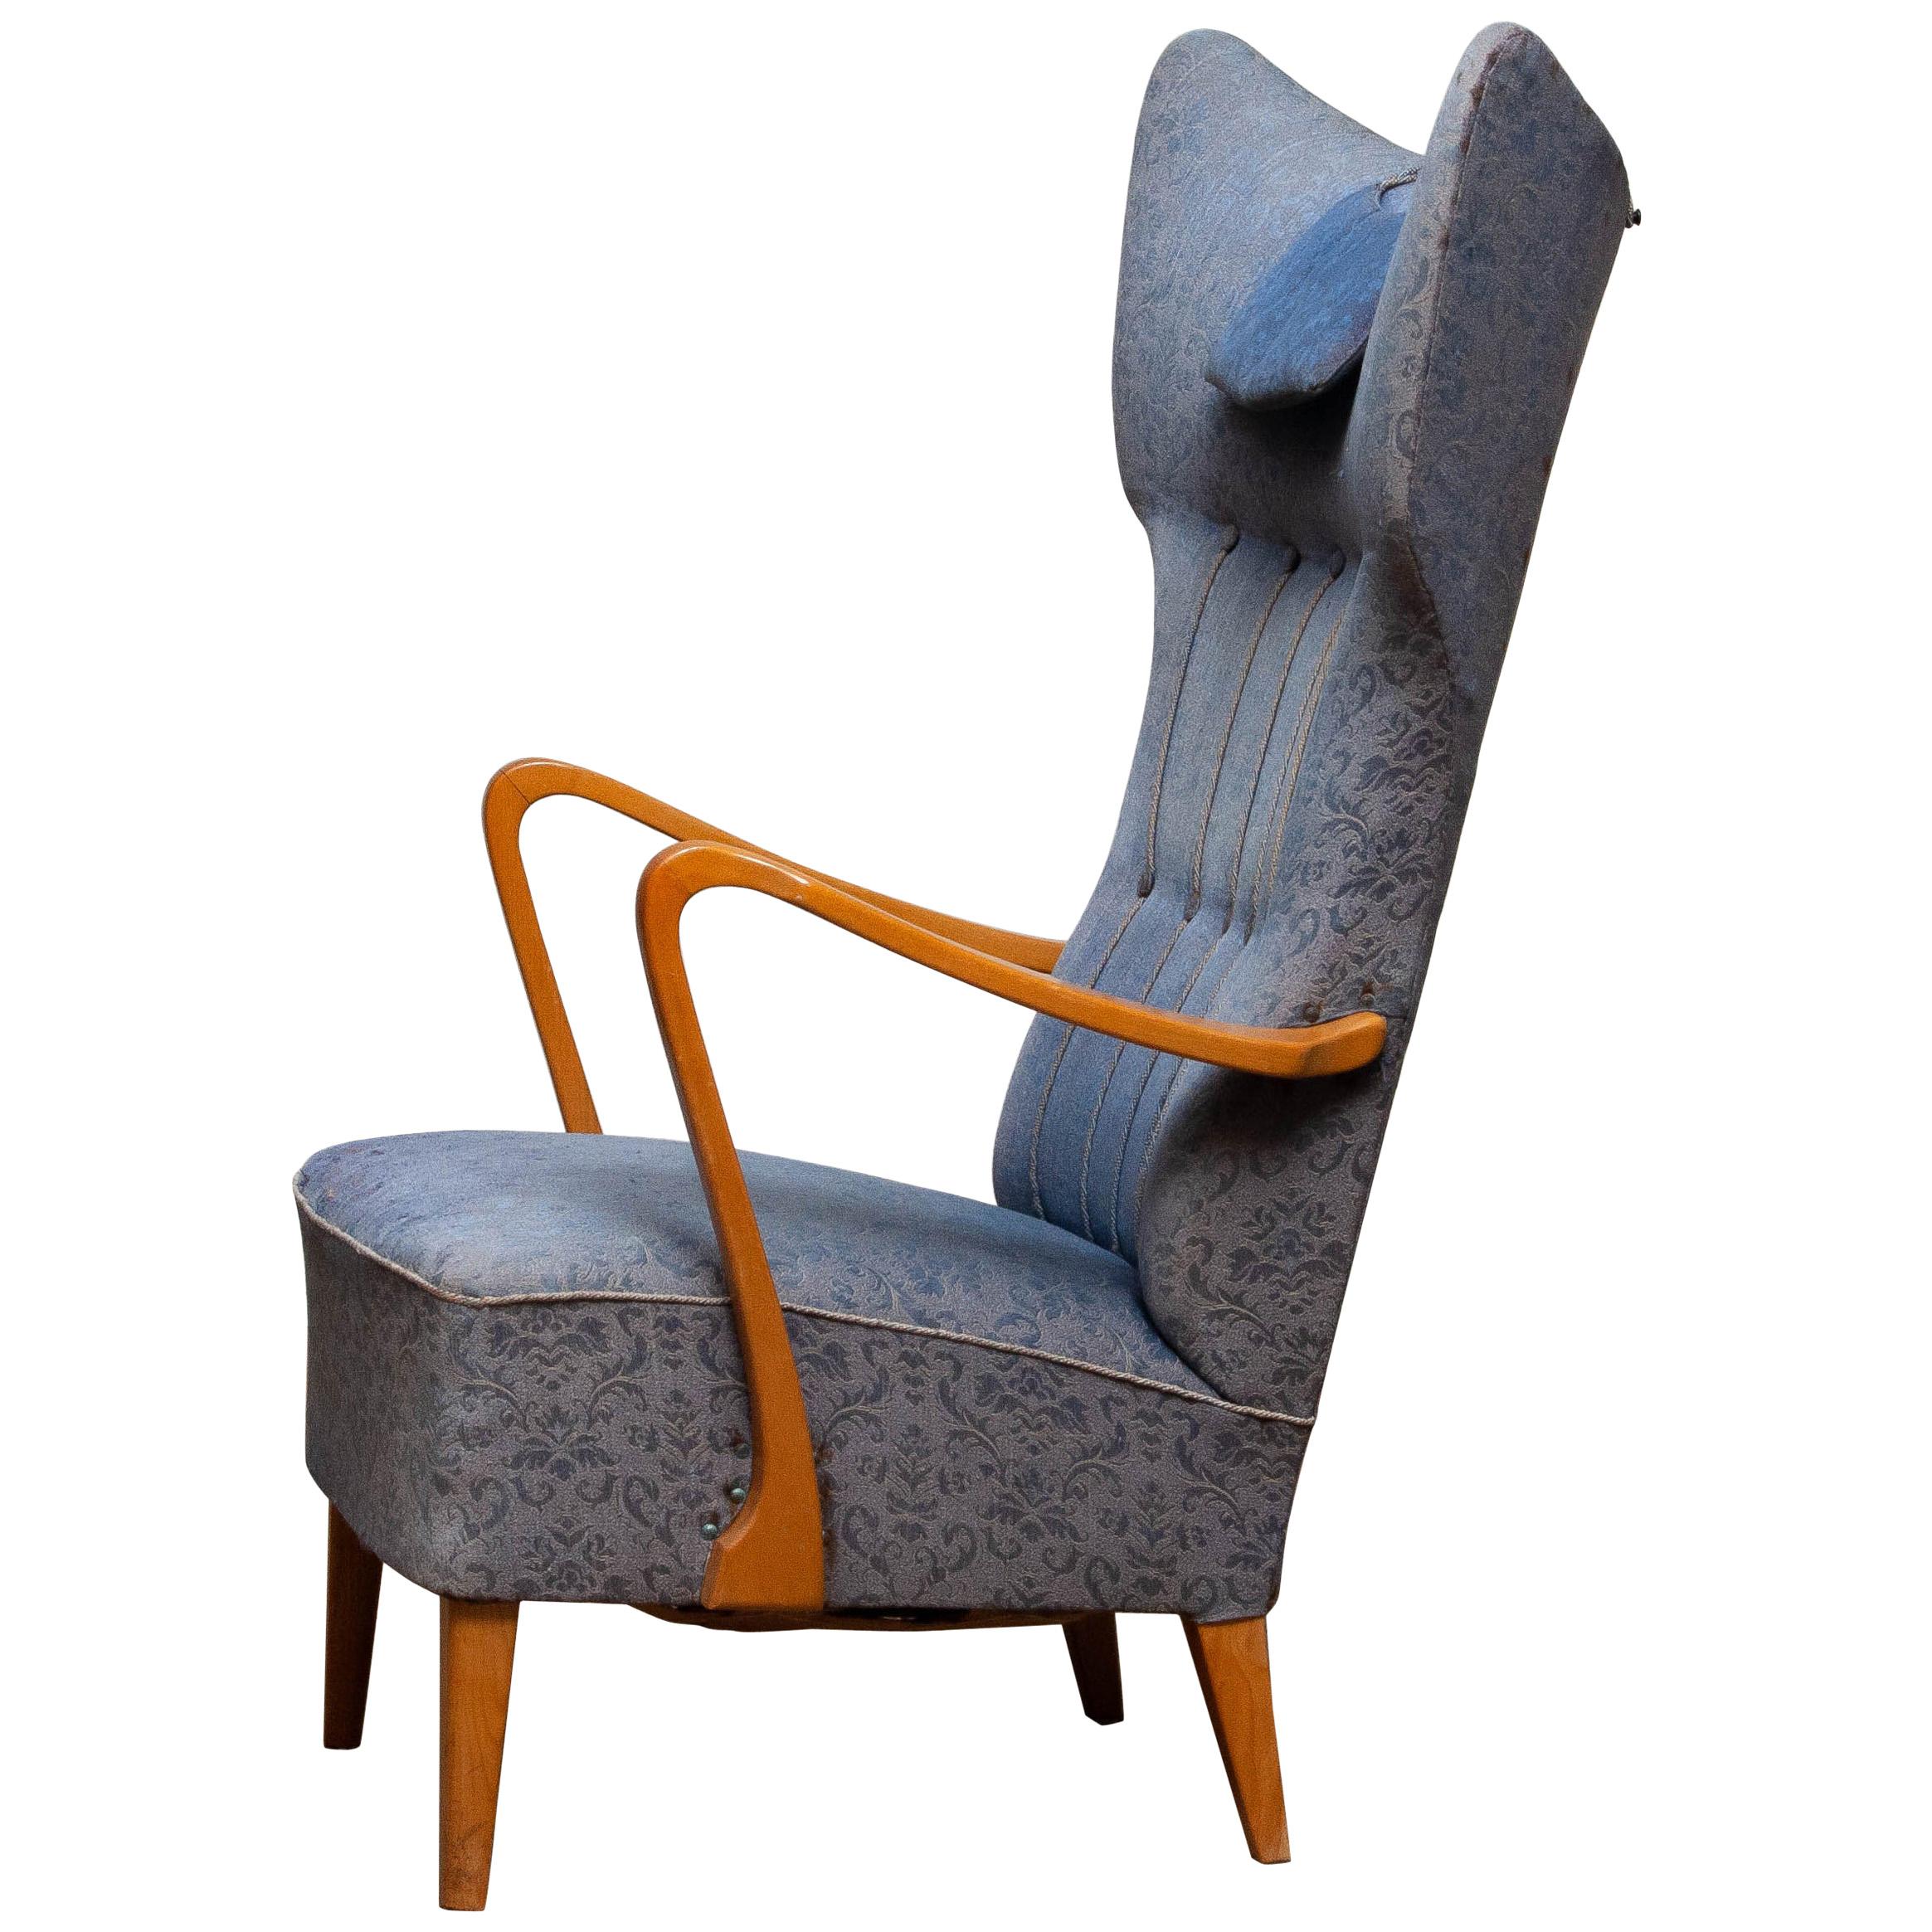 Beautiful extravagant and unique Art Nouveau wingback chair from the 1920s with extra high backrest. Made in Sweden.
The extremely slim and typical Art Nouveau armrests are made of oak in A-1 quality even as the legs.
Springs and bindings are in